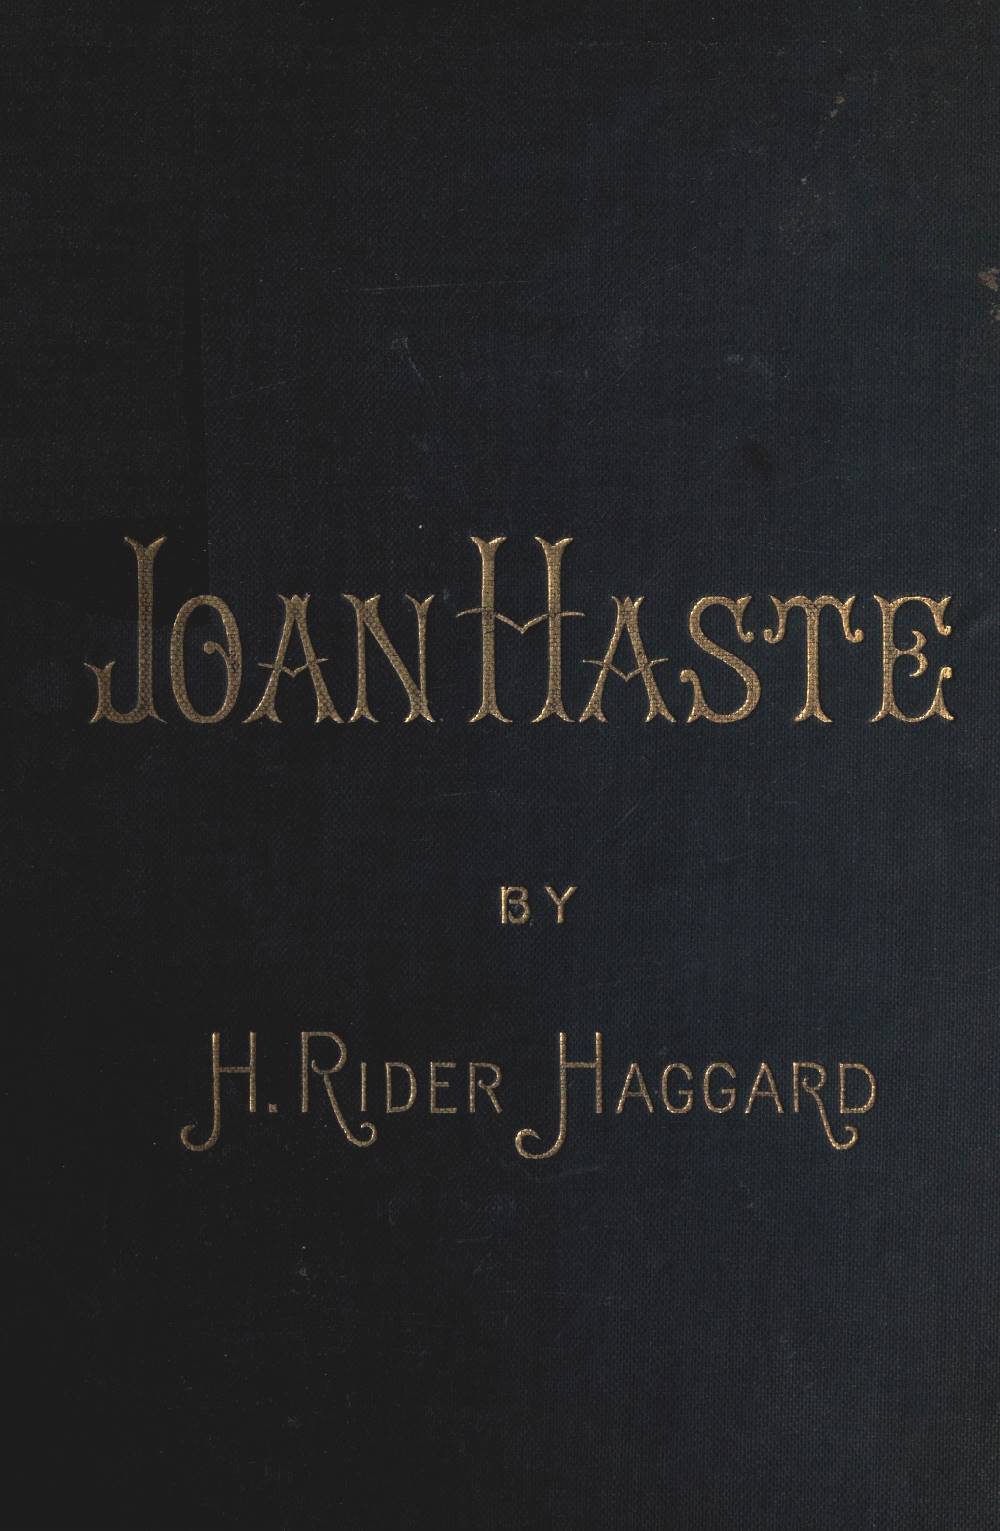 The Project Gutenberg eBook of Joan Haste, by H. Rider Haggard